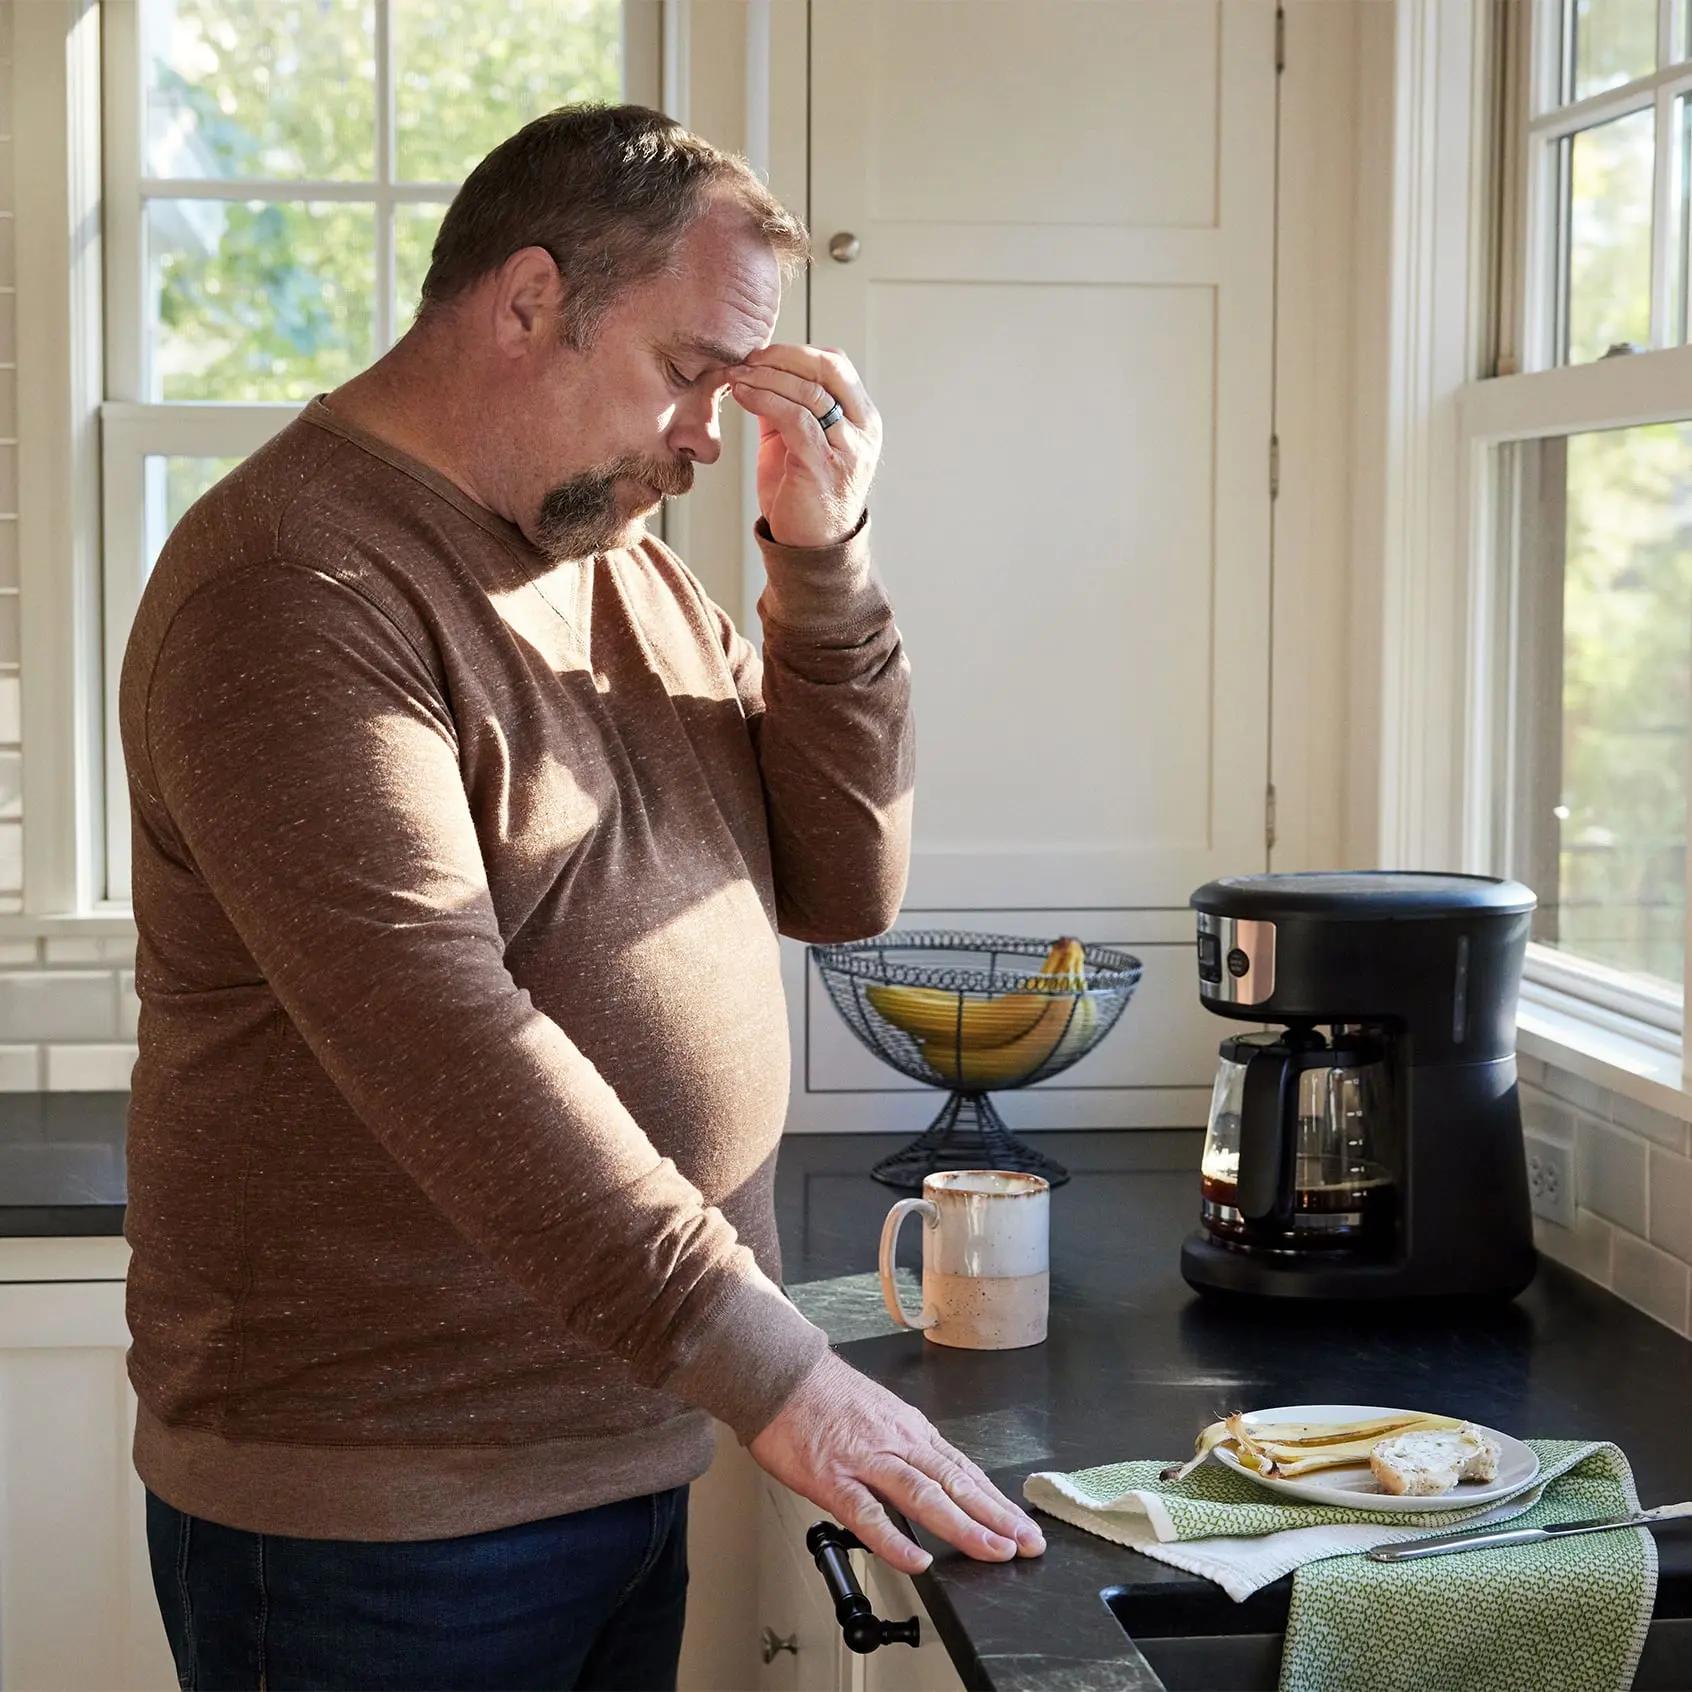 The image shows a man standing in a kitchen, holding his forehead indicating fatigue.